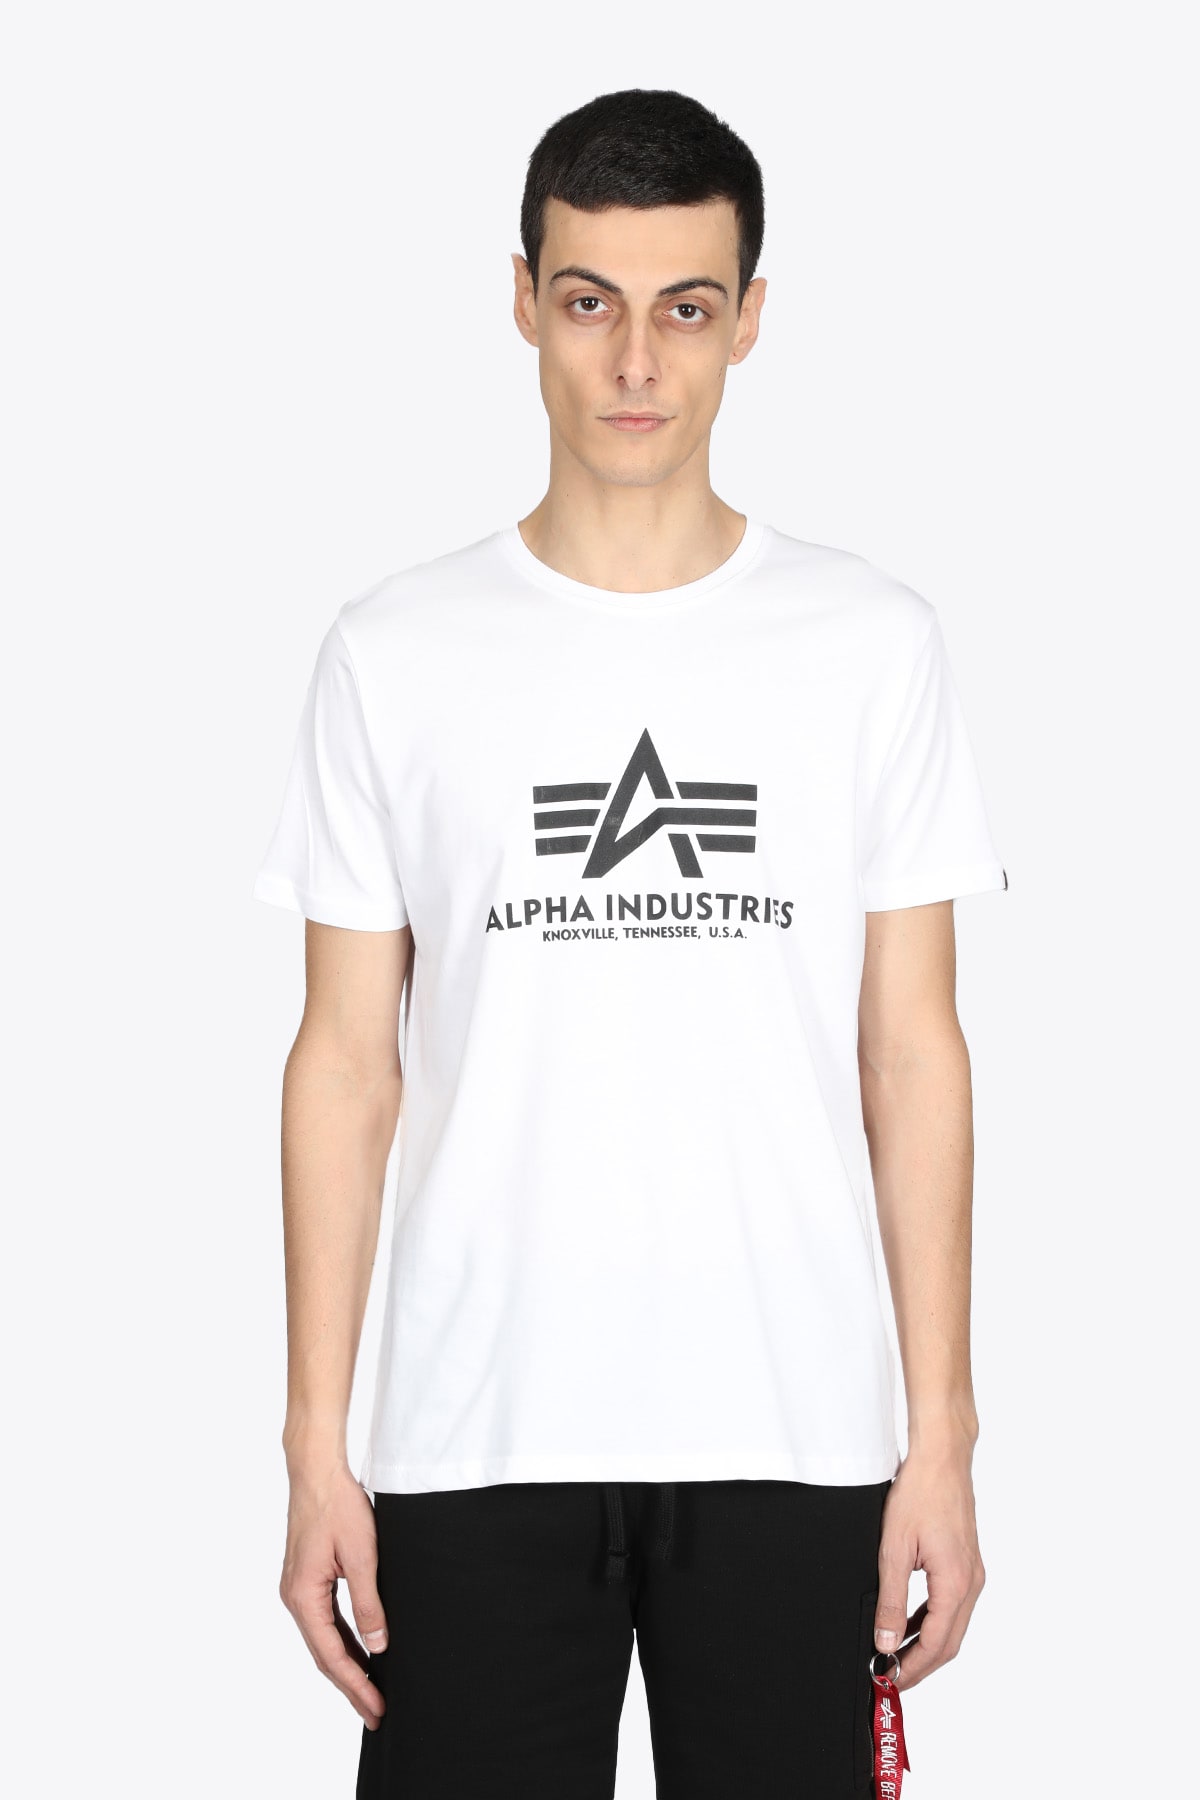 Alpha Industries Basic T-shirt White cotton t-shirt with front logo print